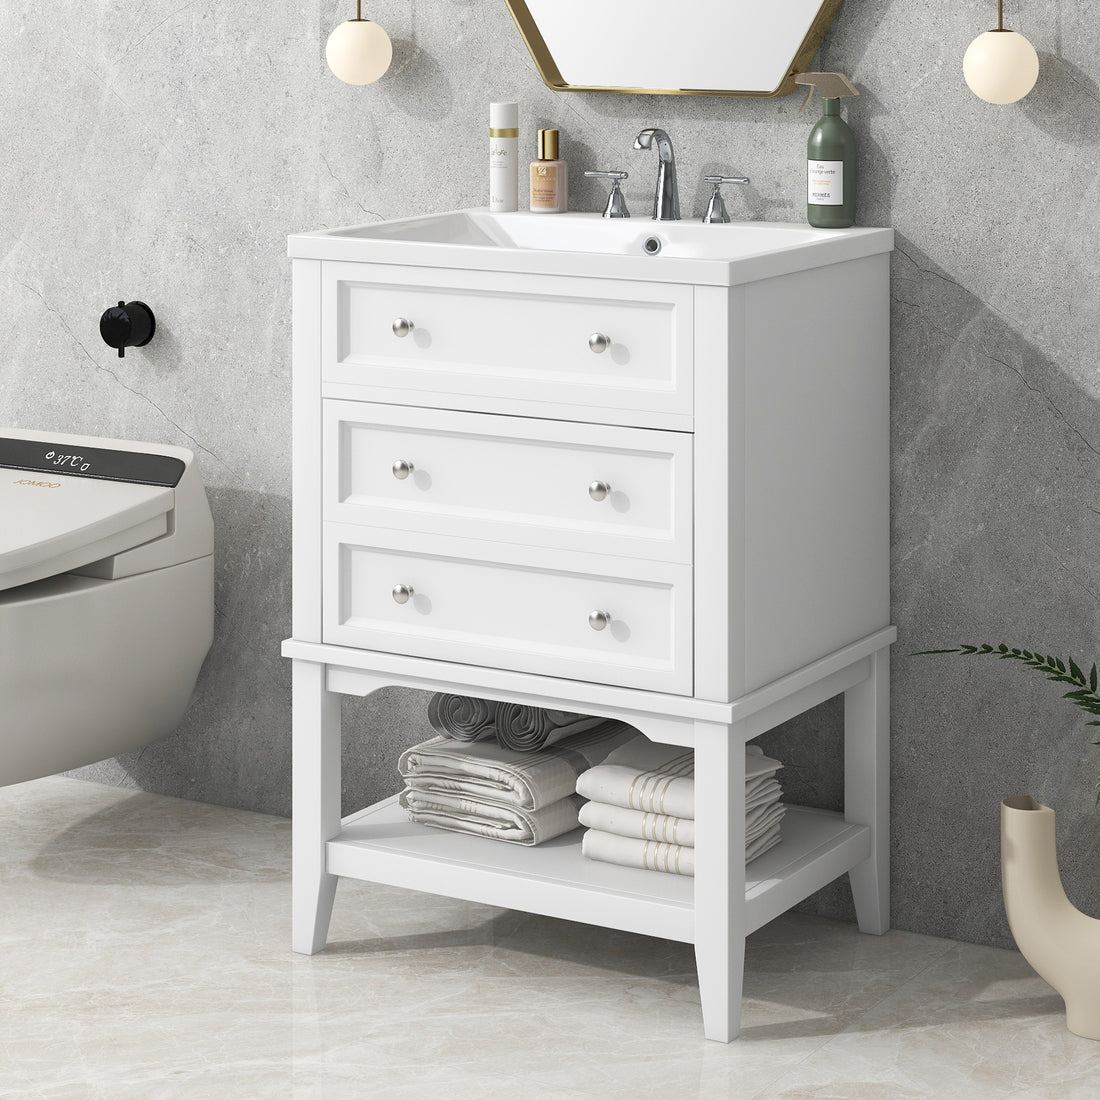 24" Bathroom Vanity Without Sink, Base Only, Solid white-solid wood+mdf